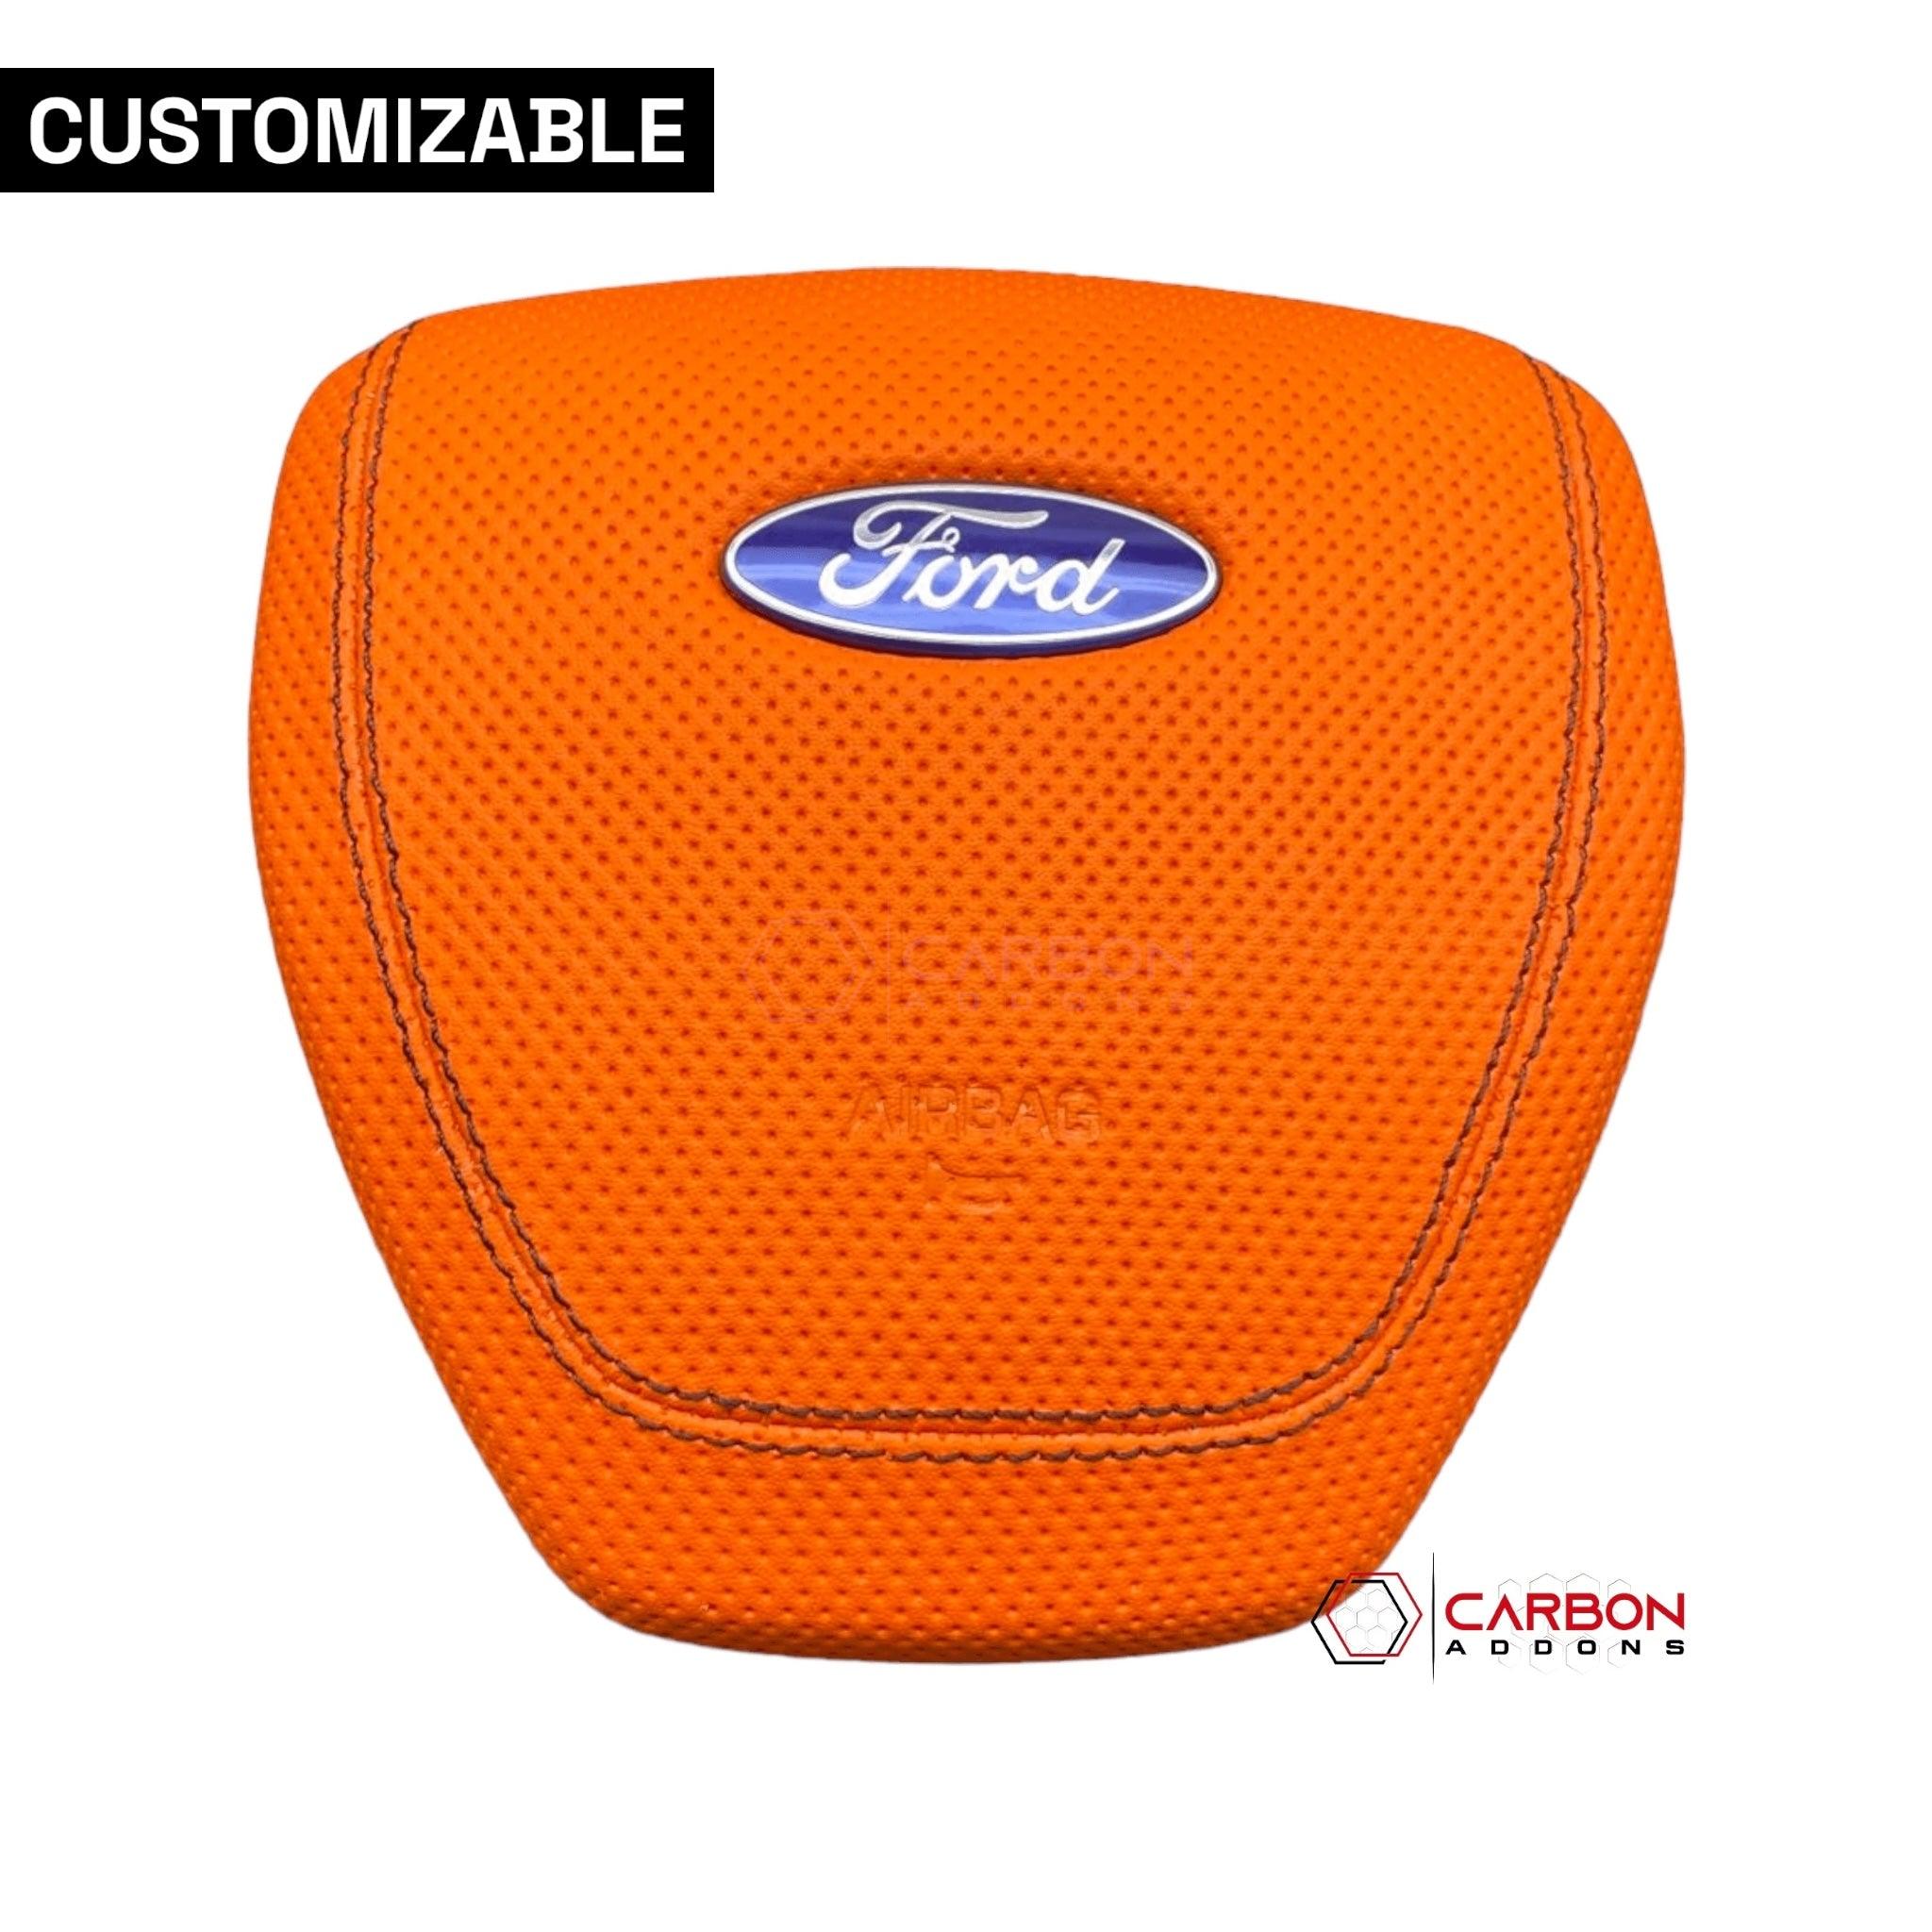 Ford F150 2015-2020 Custom Airbag Housing - carbonaddons Carbon Fiber Parts, Accessories, Upgrades, Mods